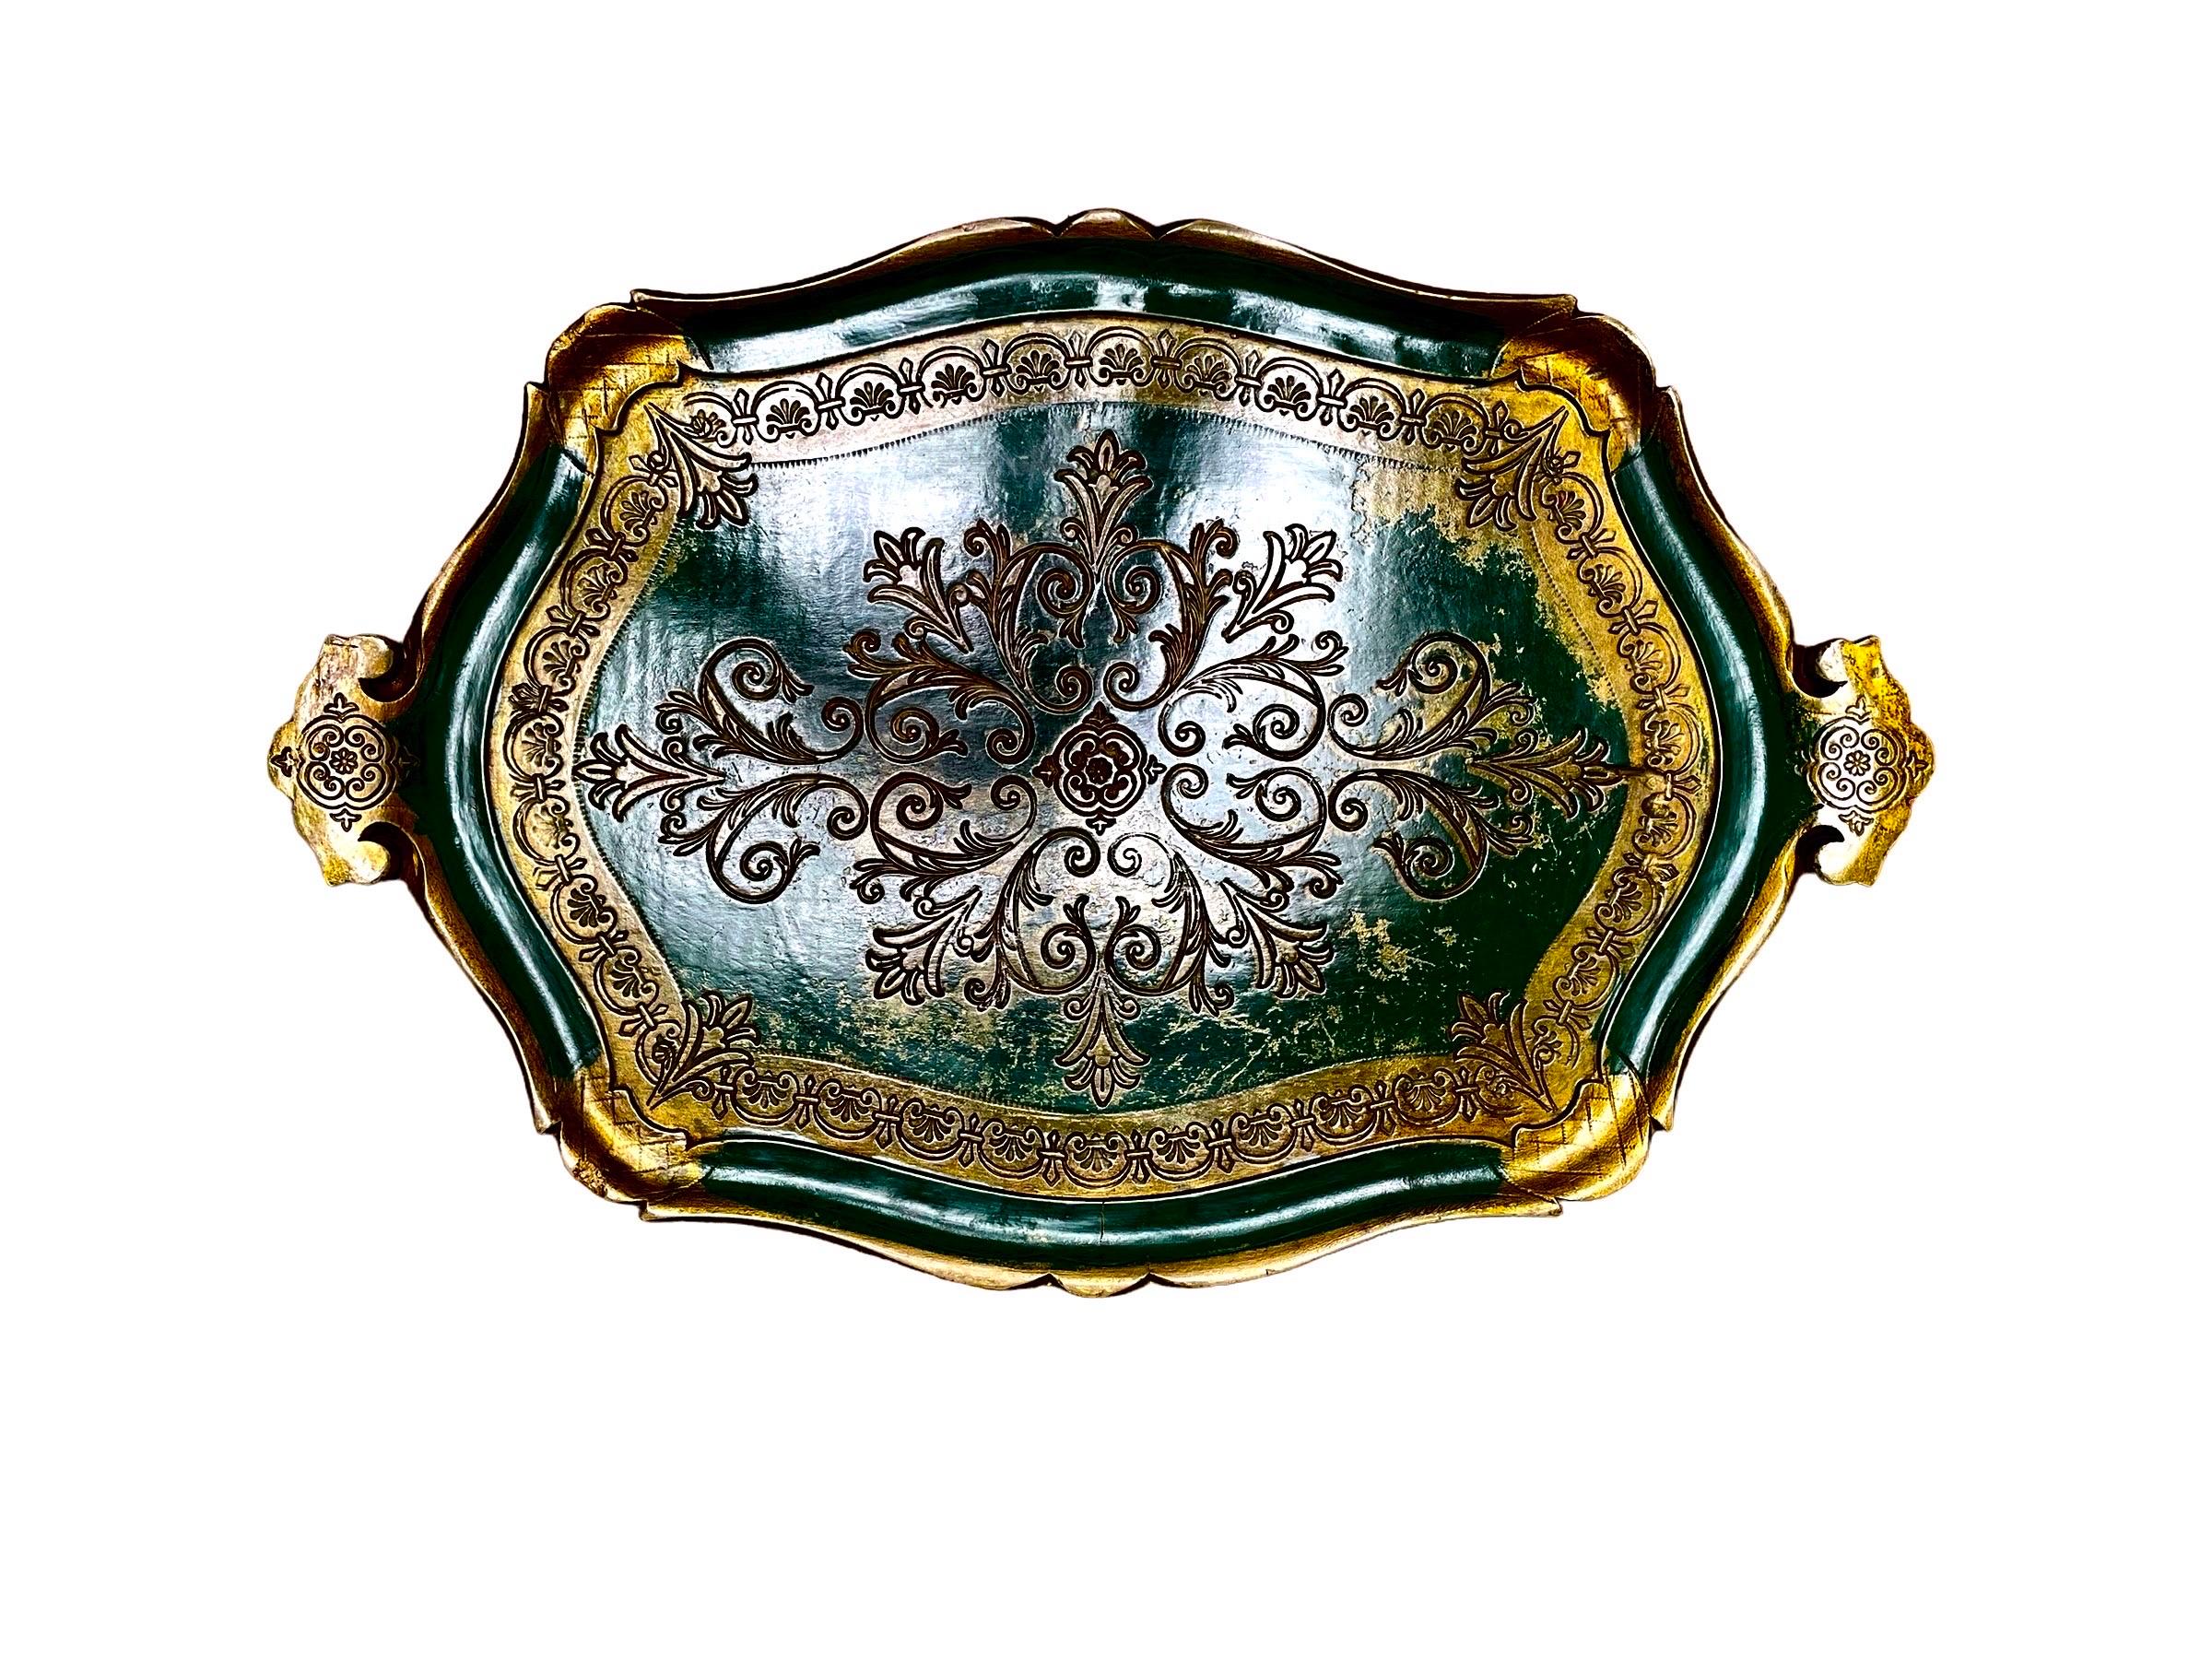 A Pair of Florentine papier mache trays with carved borders and handles and scroll cut carved swirling decorations.
Excellent patinas 

19.5 inches long 